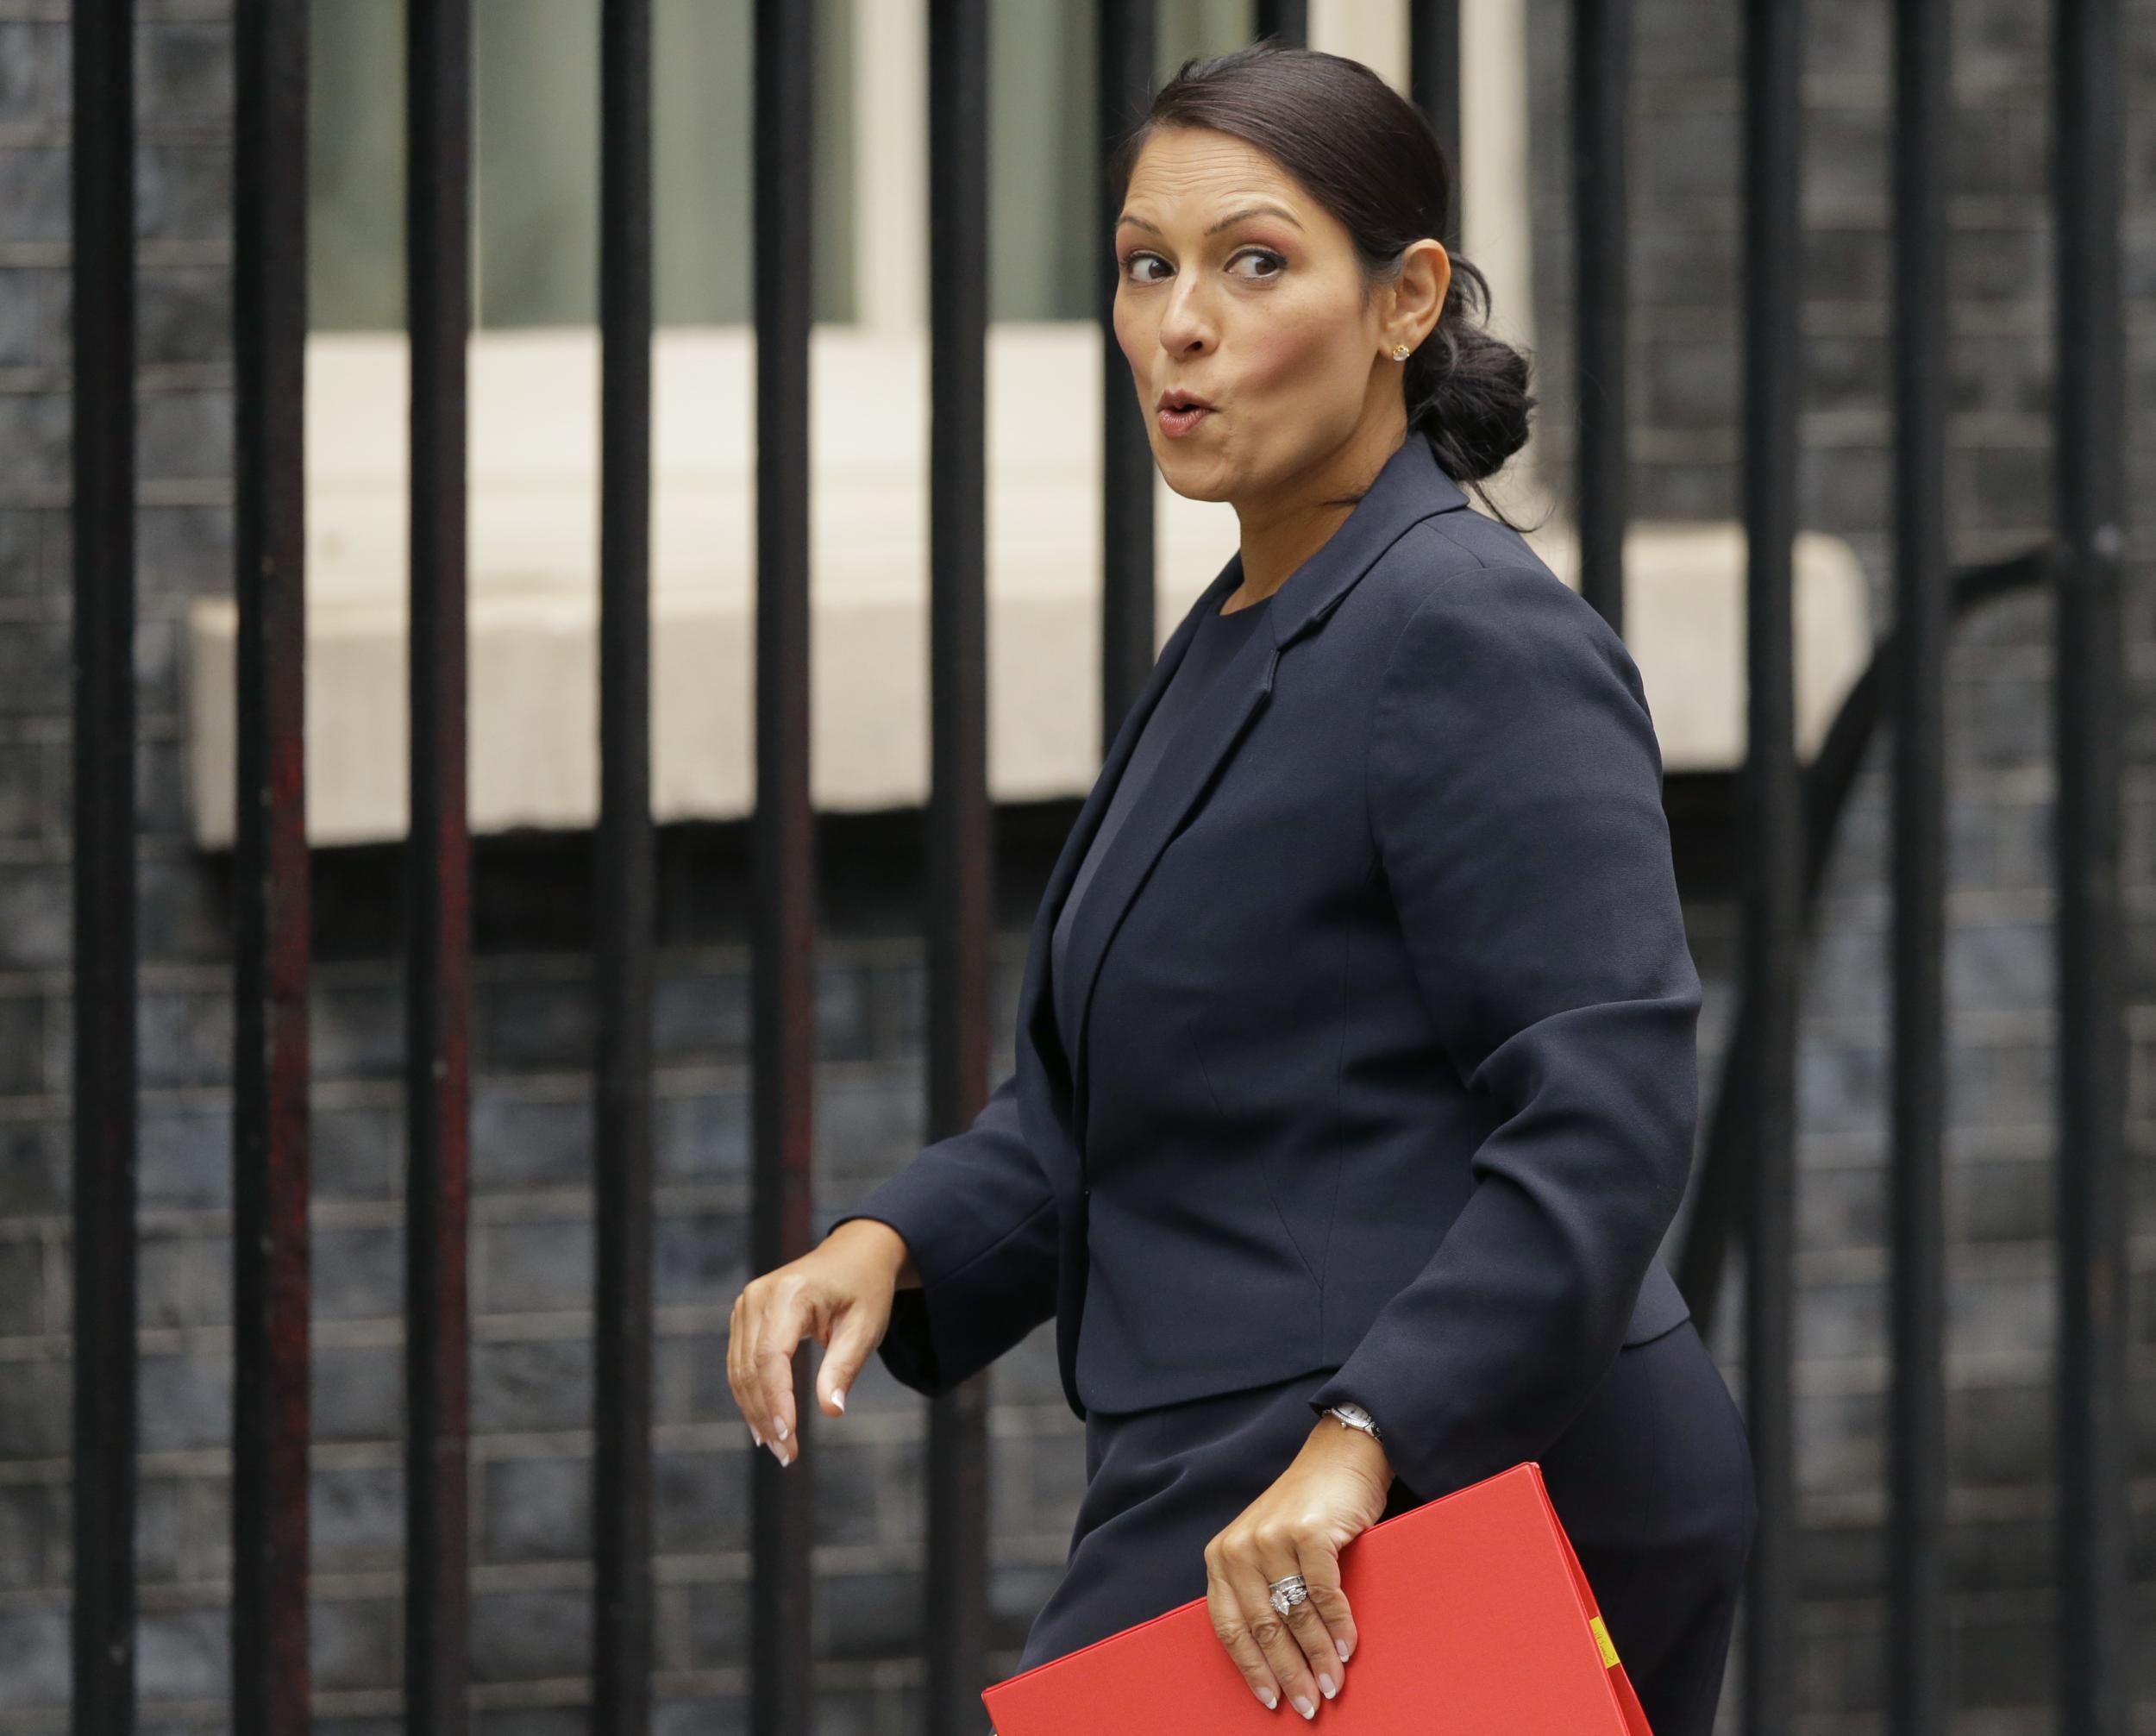 One suspects Ms Patel may not look so chirpy when she walks in to Downing Street shortly